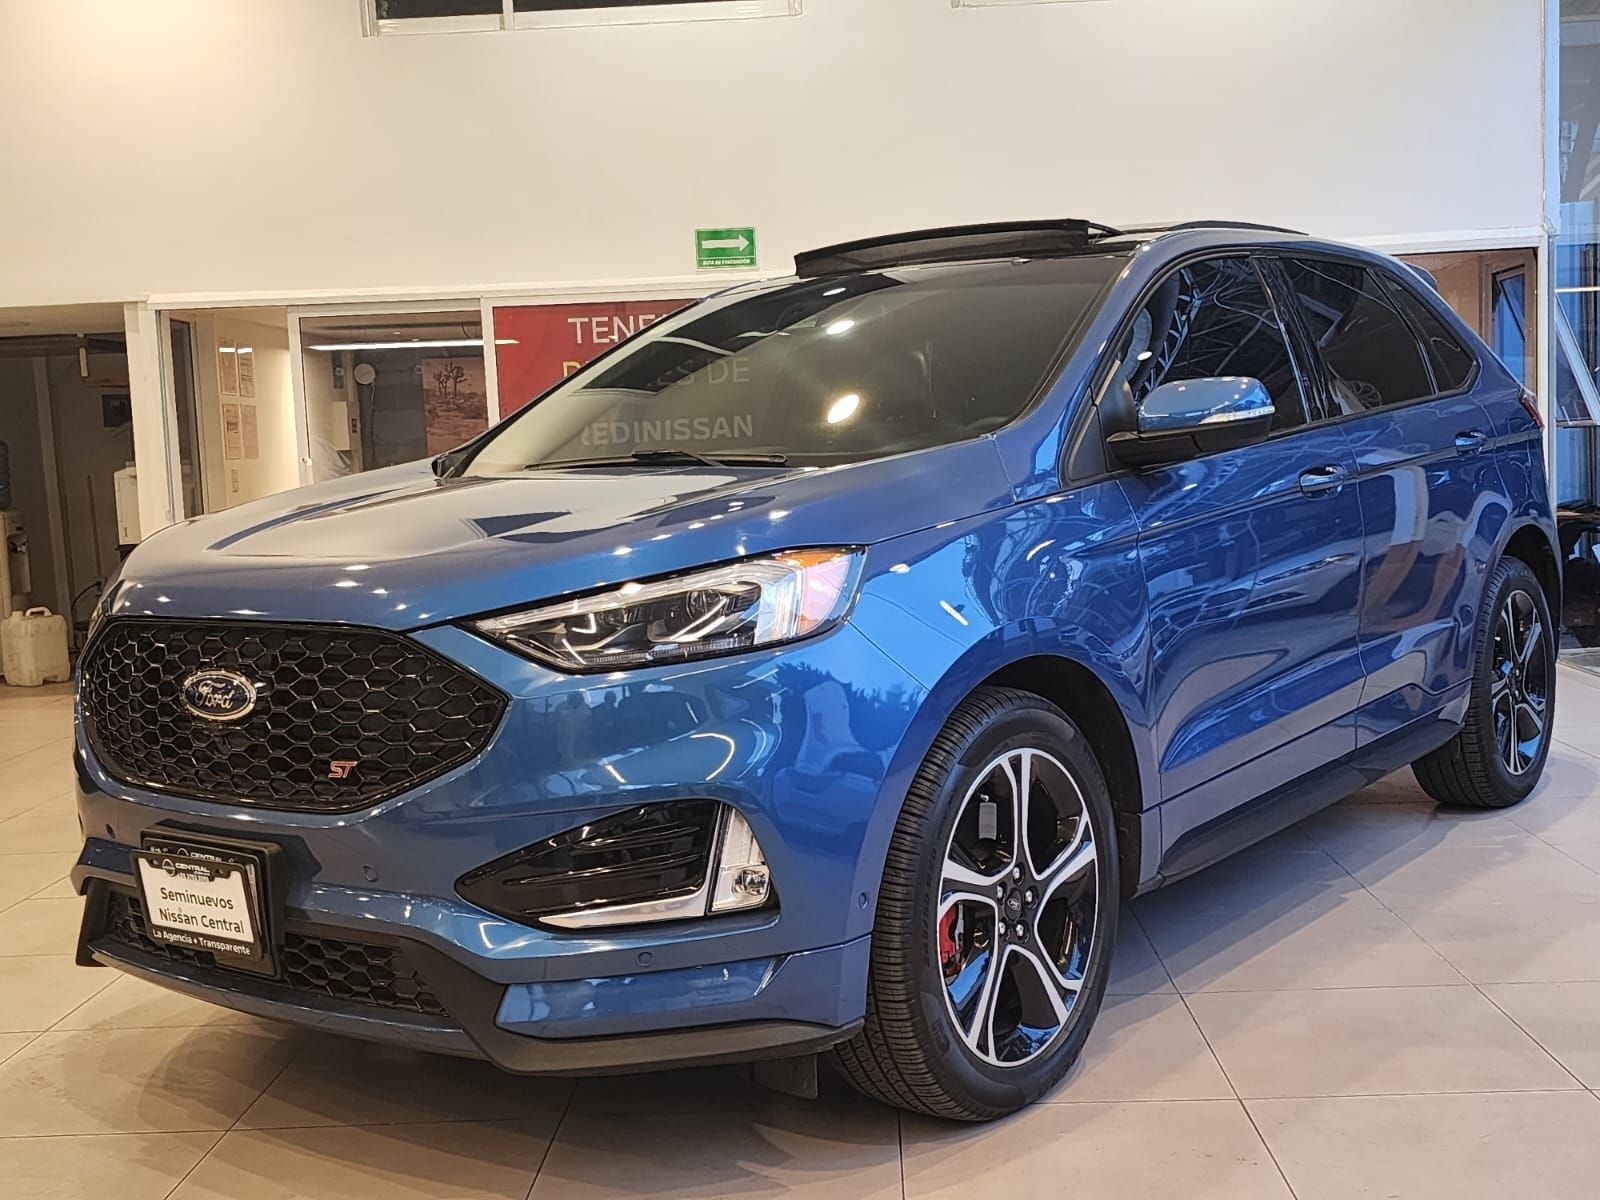 2019 Ford Edge 2.7 ST Ecoboost At